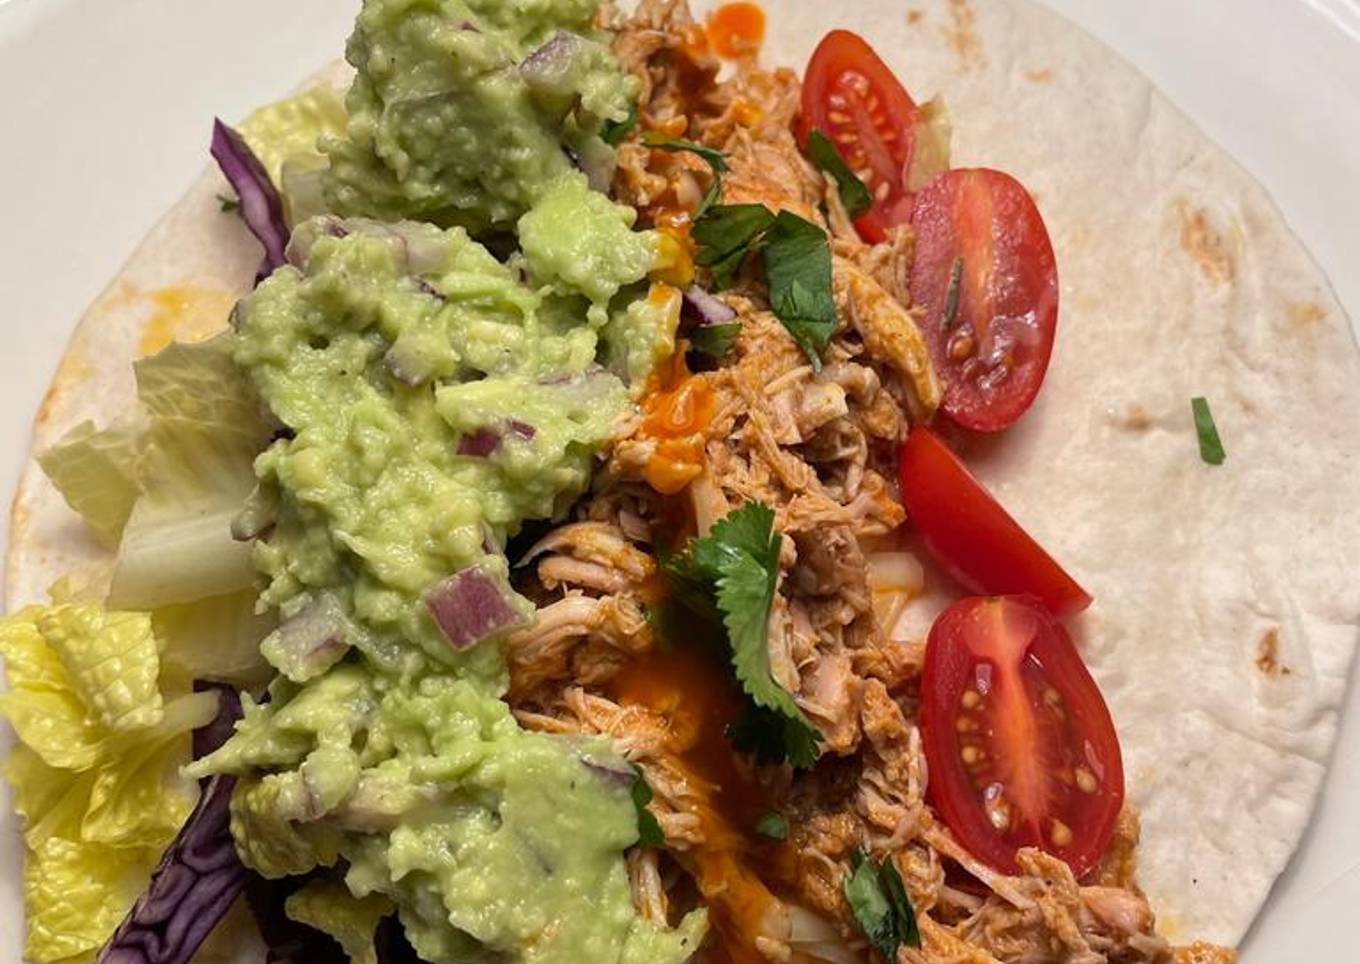 Easy pulled chicken tacos 🌮 with homemade guacamole 🥑 #onepot